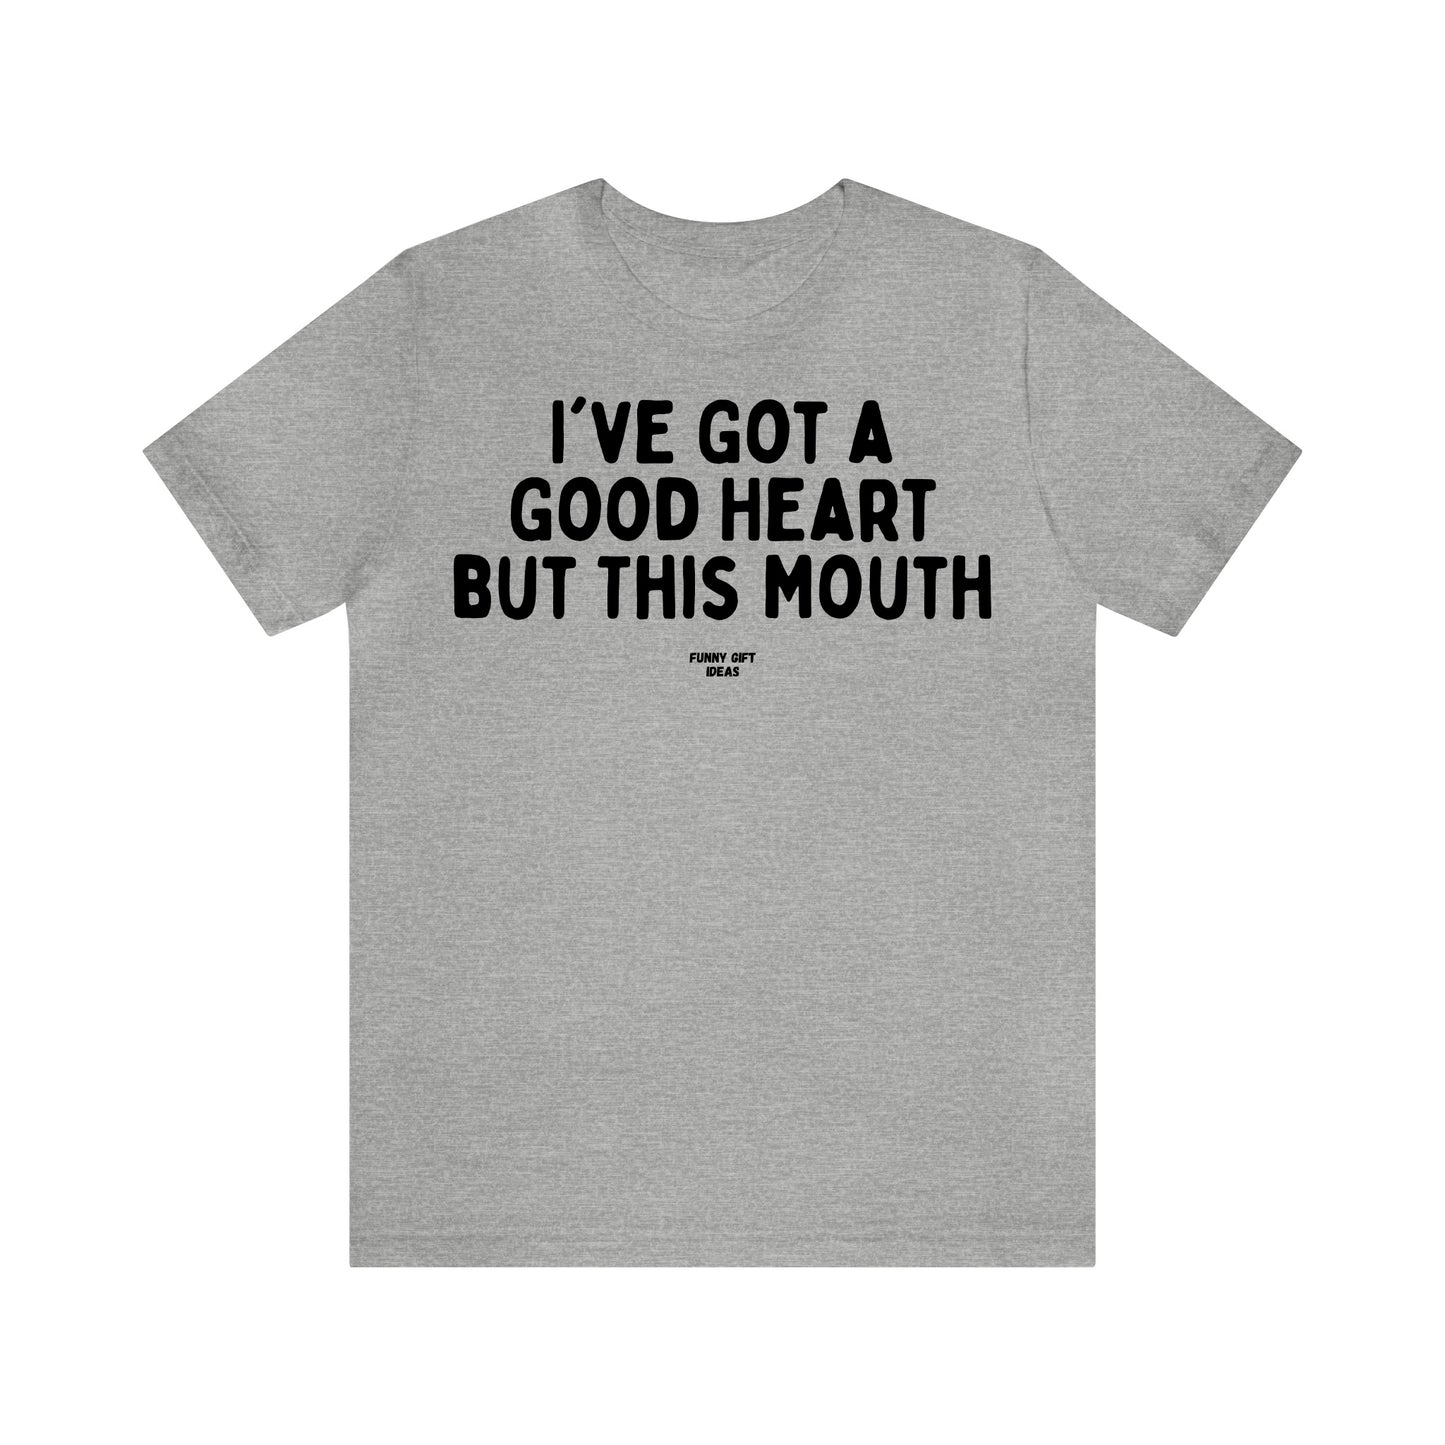 Funny Shirts for Women - I've Got a Good Heart but This Mouth - Women's T Shirts